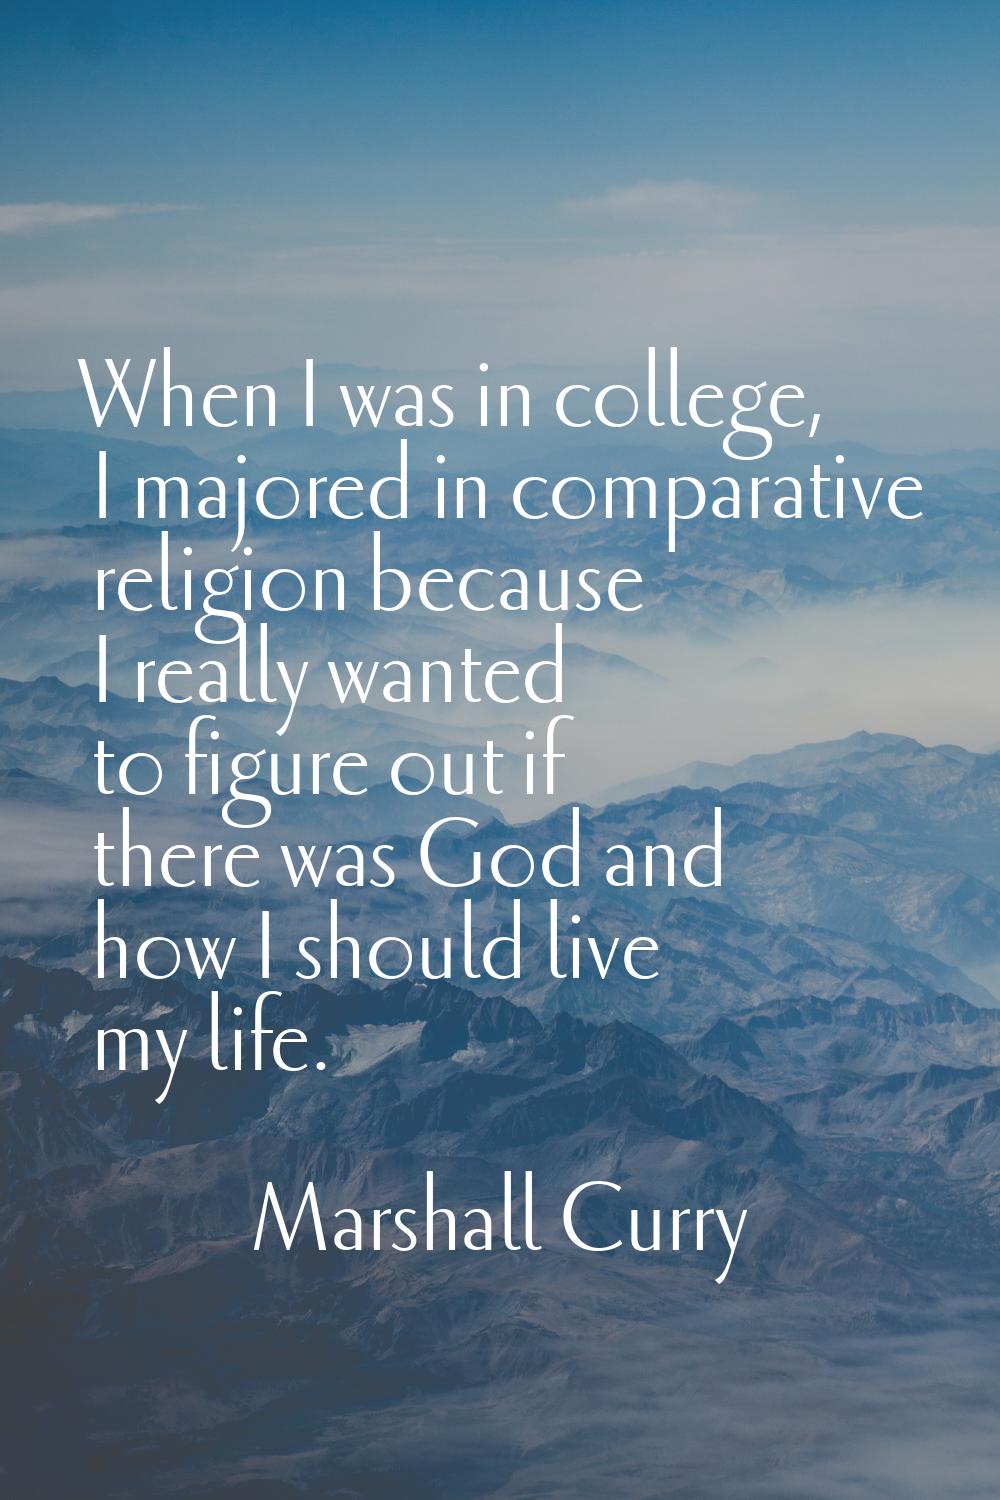 When I was in college, I majored in comparative religion because I really wanted to figure out if t